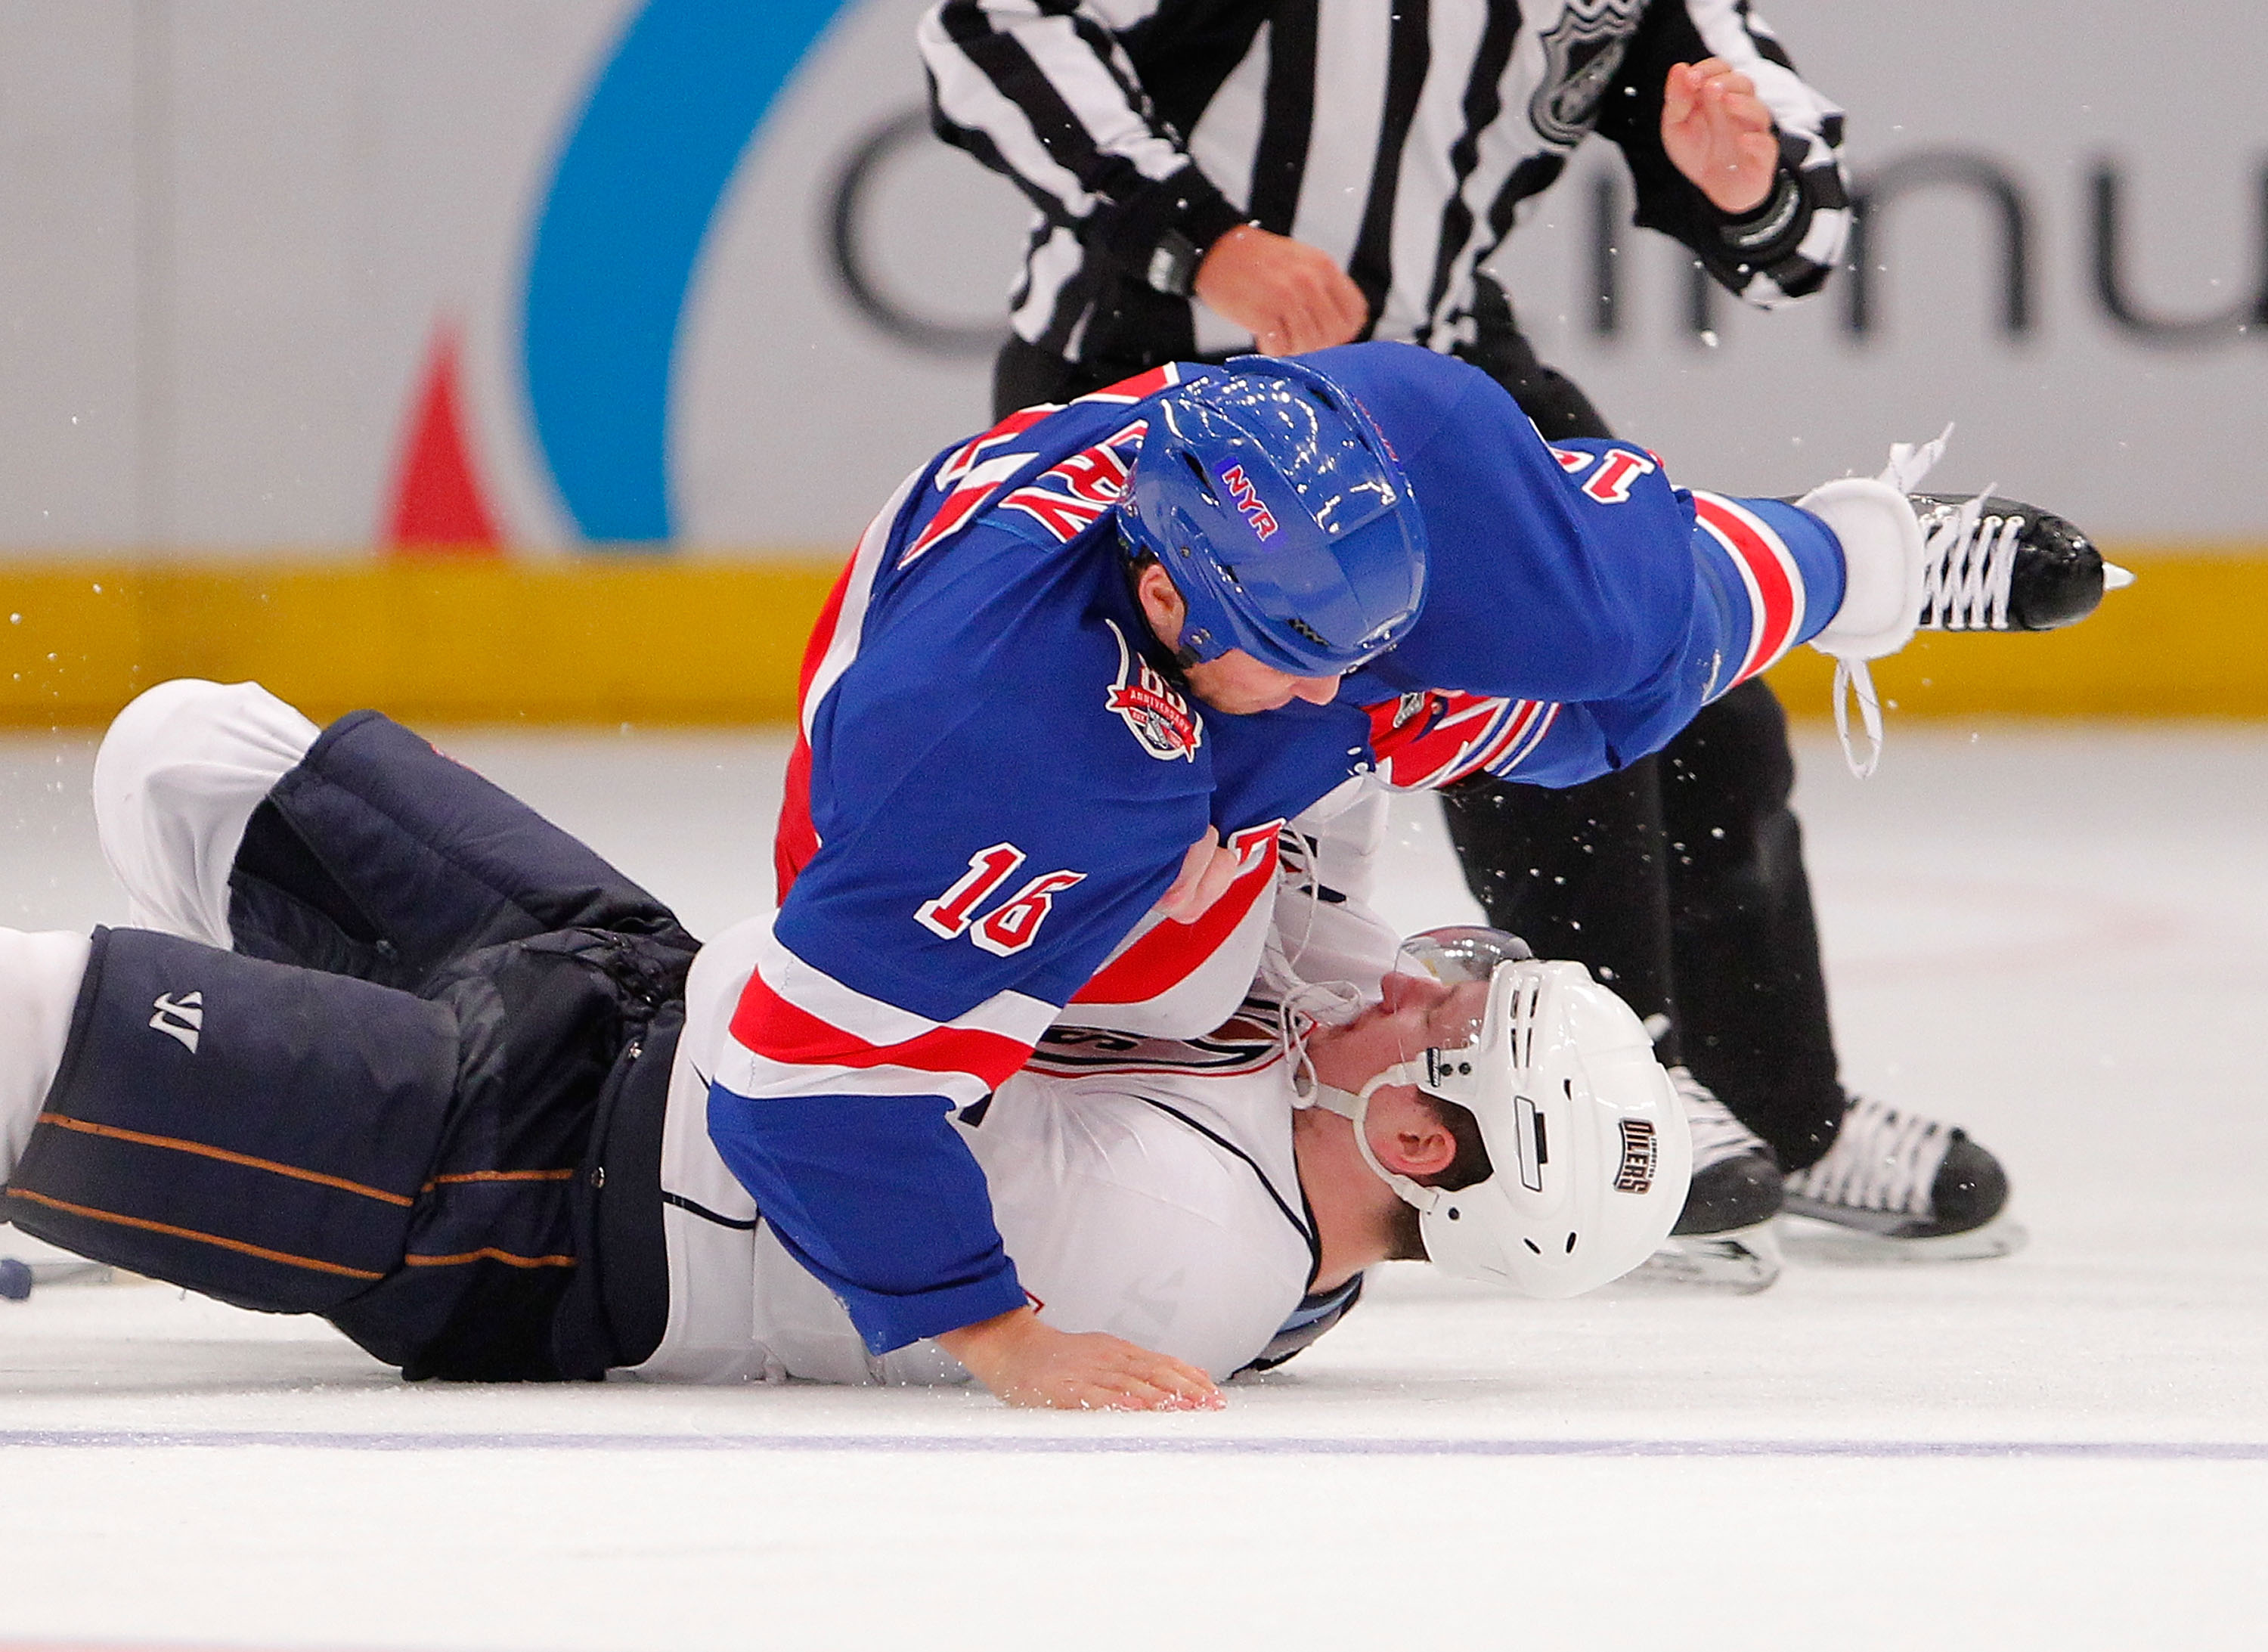 NEW YORK - NOVEMBER 14:  Ladislav Smid #5 of the Edmonton Oilers is on the bottom in a fight with Sean Avery #16 of the New York Rangers in the third period of a hockey game at Madison Square Garden on November 14, 2010 in New York City.  (Photo by Paul B